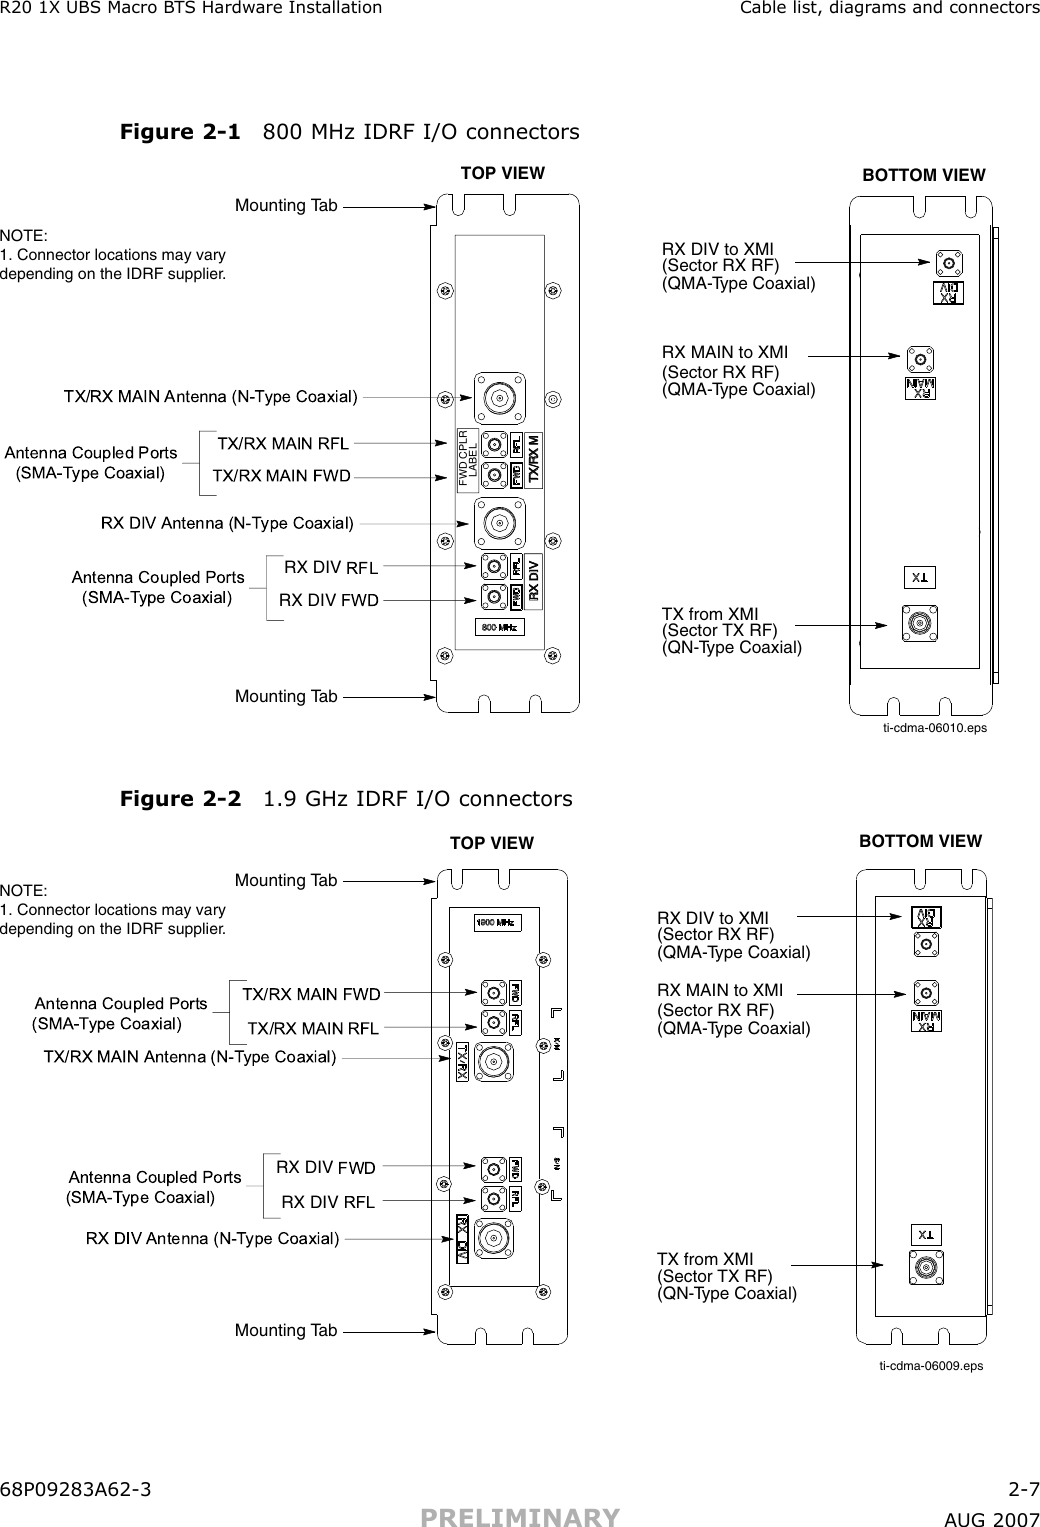 R20 1X UBS Macro B T S Hardw are Installation Cable list, diagr ams and connectorsFigure 2 -1 800 MHz IDRF I/O connectorsTOP VIEW BOTTOM VIEWRX DIV to XMI(QMA-Type Coaxial)TX from XMI (Sector TX RF) (QN-Type Coaxial)RX MAIN to XMI (QMA-Type Coaxial)ti-cdma-06010.epsTX/RX MAIN Antenna (N-T ype Coaxial)Antenna Coupled Ports   (SMA-Type Coaxial)TX/RX MAIN RFLTX/RX MAIN FWDAntenna Coupled Ports   (SMA-Type Coaxial)RX DIV RFLRX DIV FWDRX DIV Antenna (N-T ype Coaxial)(Sector RX RF) (Sector RX RF) TX/RX MRX DIVFWD CPLR   LABELMounting TabMounting TabNOTE:1. Connector locations may vary depending on the IDRF supplier.Figure 2 -2 1.9 GHz IDRF I/O connectorsTOP VIEW BOTTOM VIEWRX DIV to XMI(QMA-Type Coaxial)TX from XMI (Sector TX RF) (QN-Type Coaxial)RX MAIN to XMI (QMA-Type Coaxial)ti-cdma-06009.epsTX/RX MAIN Antenna (N-T ype Coaxial)Antenna Coupled Ports(SMA-Type Coaxial)RX DIV RFLRX DIV FWDAntenna Coupled Ports(SMA-Type Coaxial) TX/RX MAIN RFLTX/RX MAIN FWDRX DIV Antenna (N-T ype Coaxial)Mounting Tab(Sector RX RF) (Sector RX RF) Mounting TabNOTE:1. Connector locations may vary depending on the IDRF supplier.68P09283A62 -3 2 -7PRELIMINARY A UG 2007